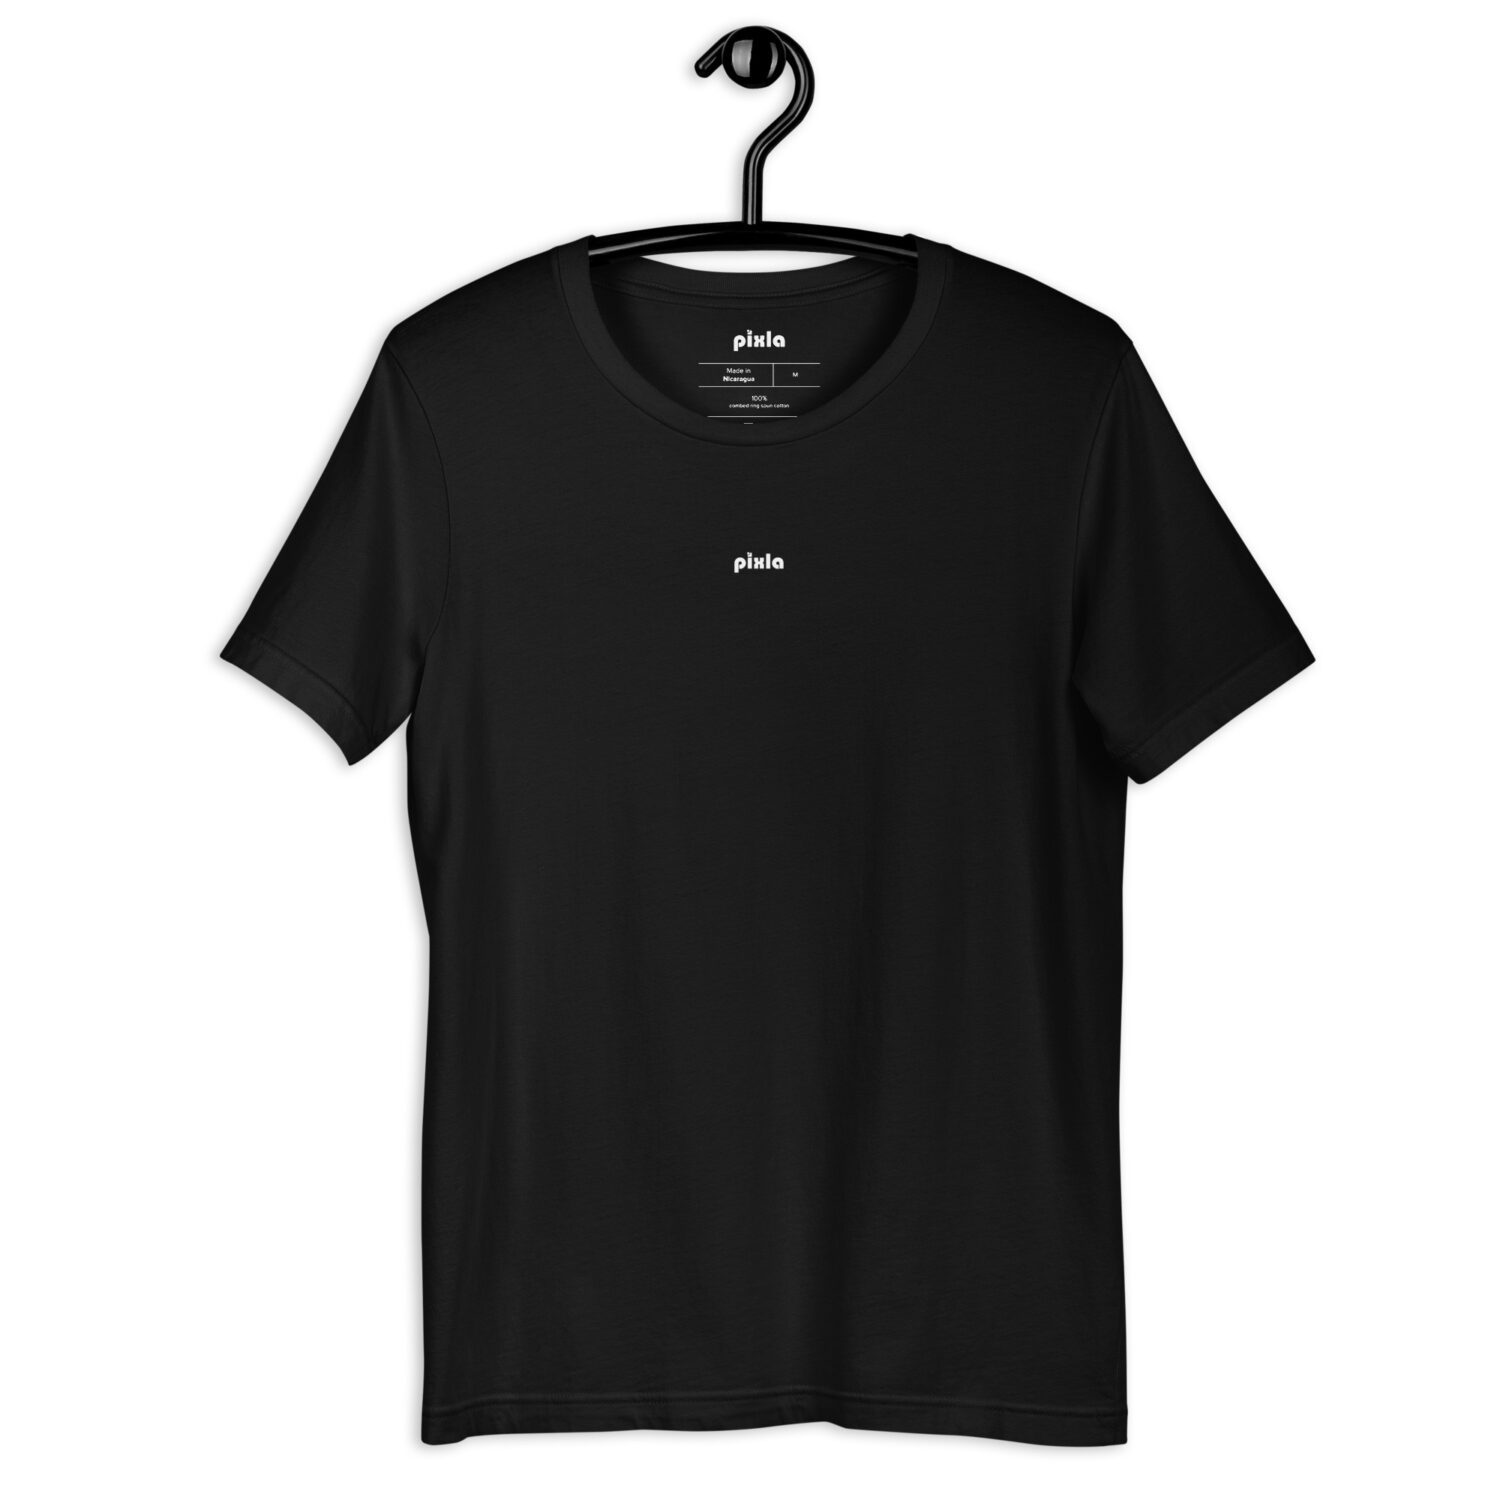 Soft and medium to lightweight black t-shirt with just the right amount of stretch without losing structure. It’s comfortable and flattering and comes with a royal blue print on the upper back and a logo on the front.